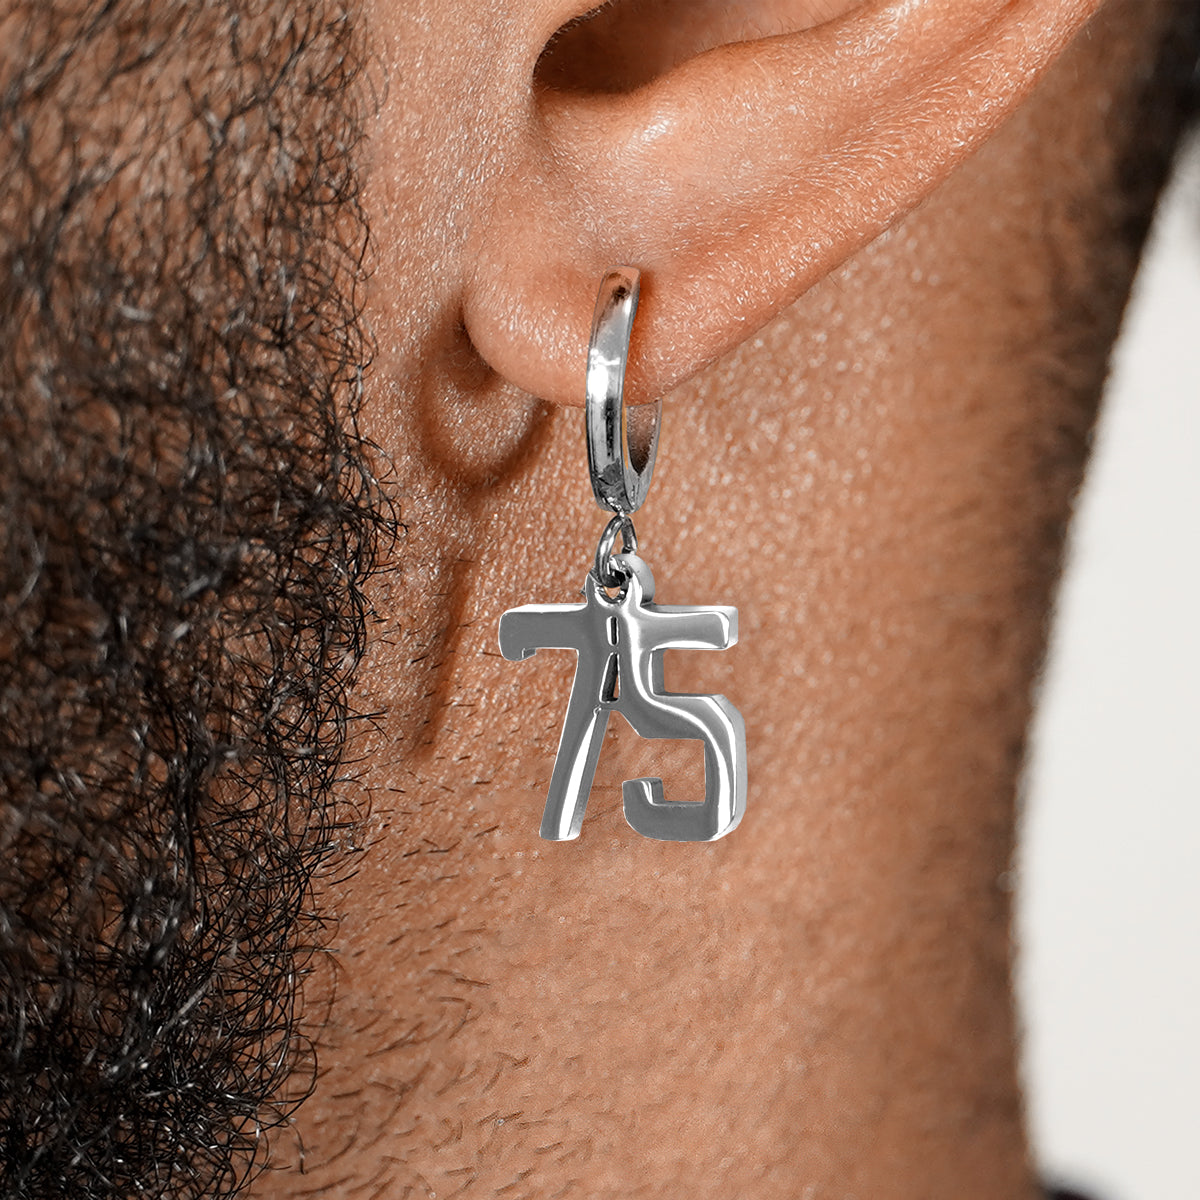 75 Number Earring - Stainless Steel